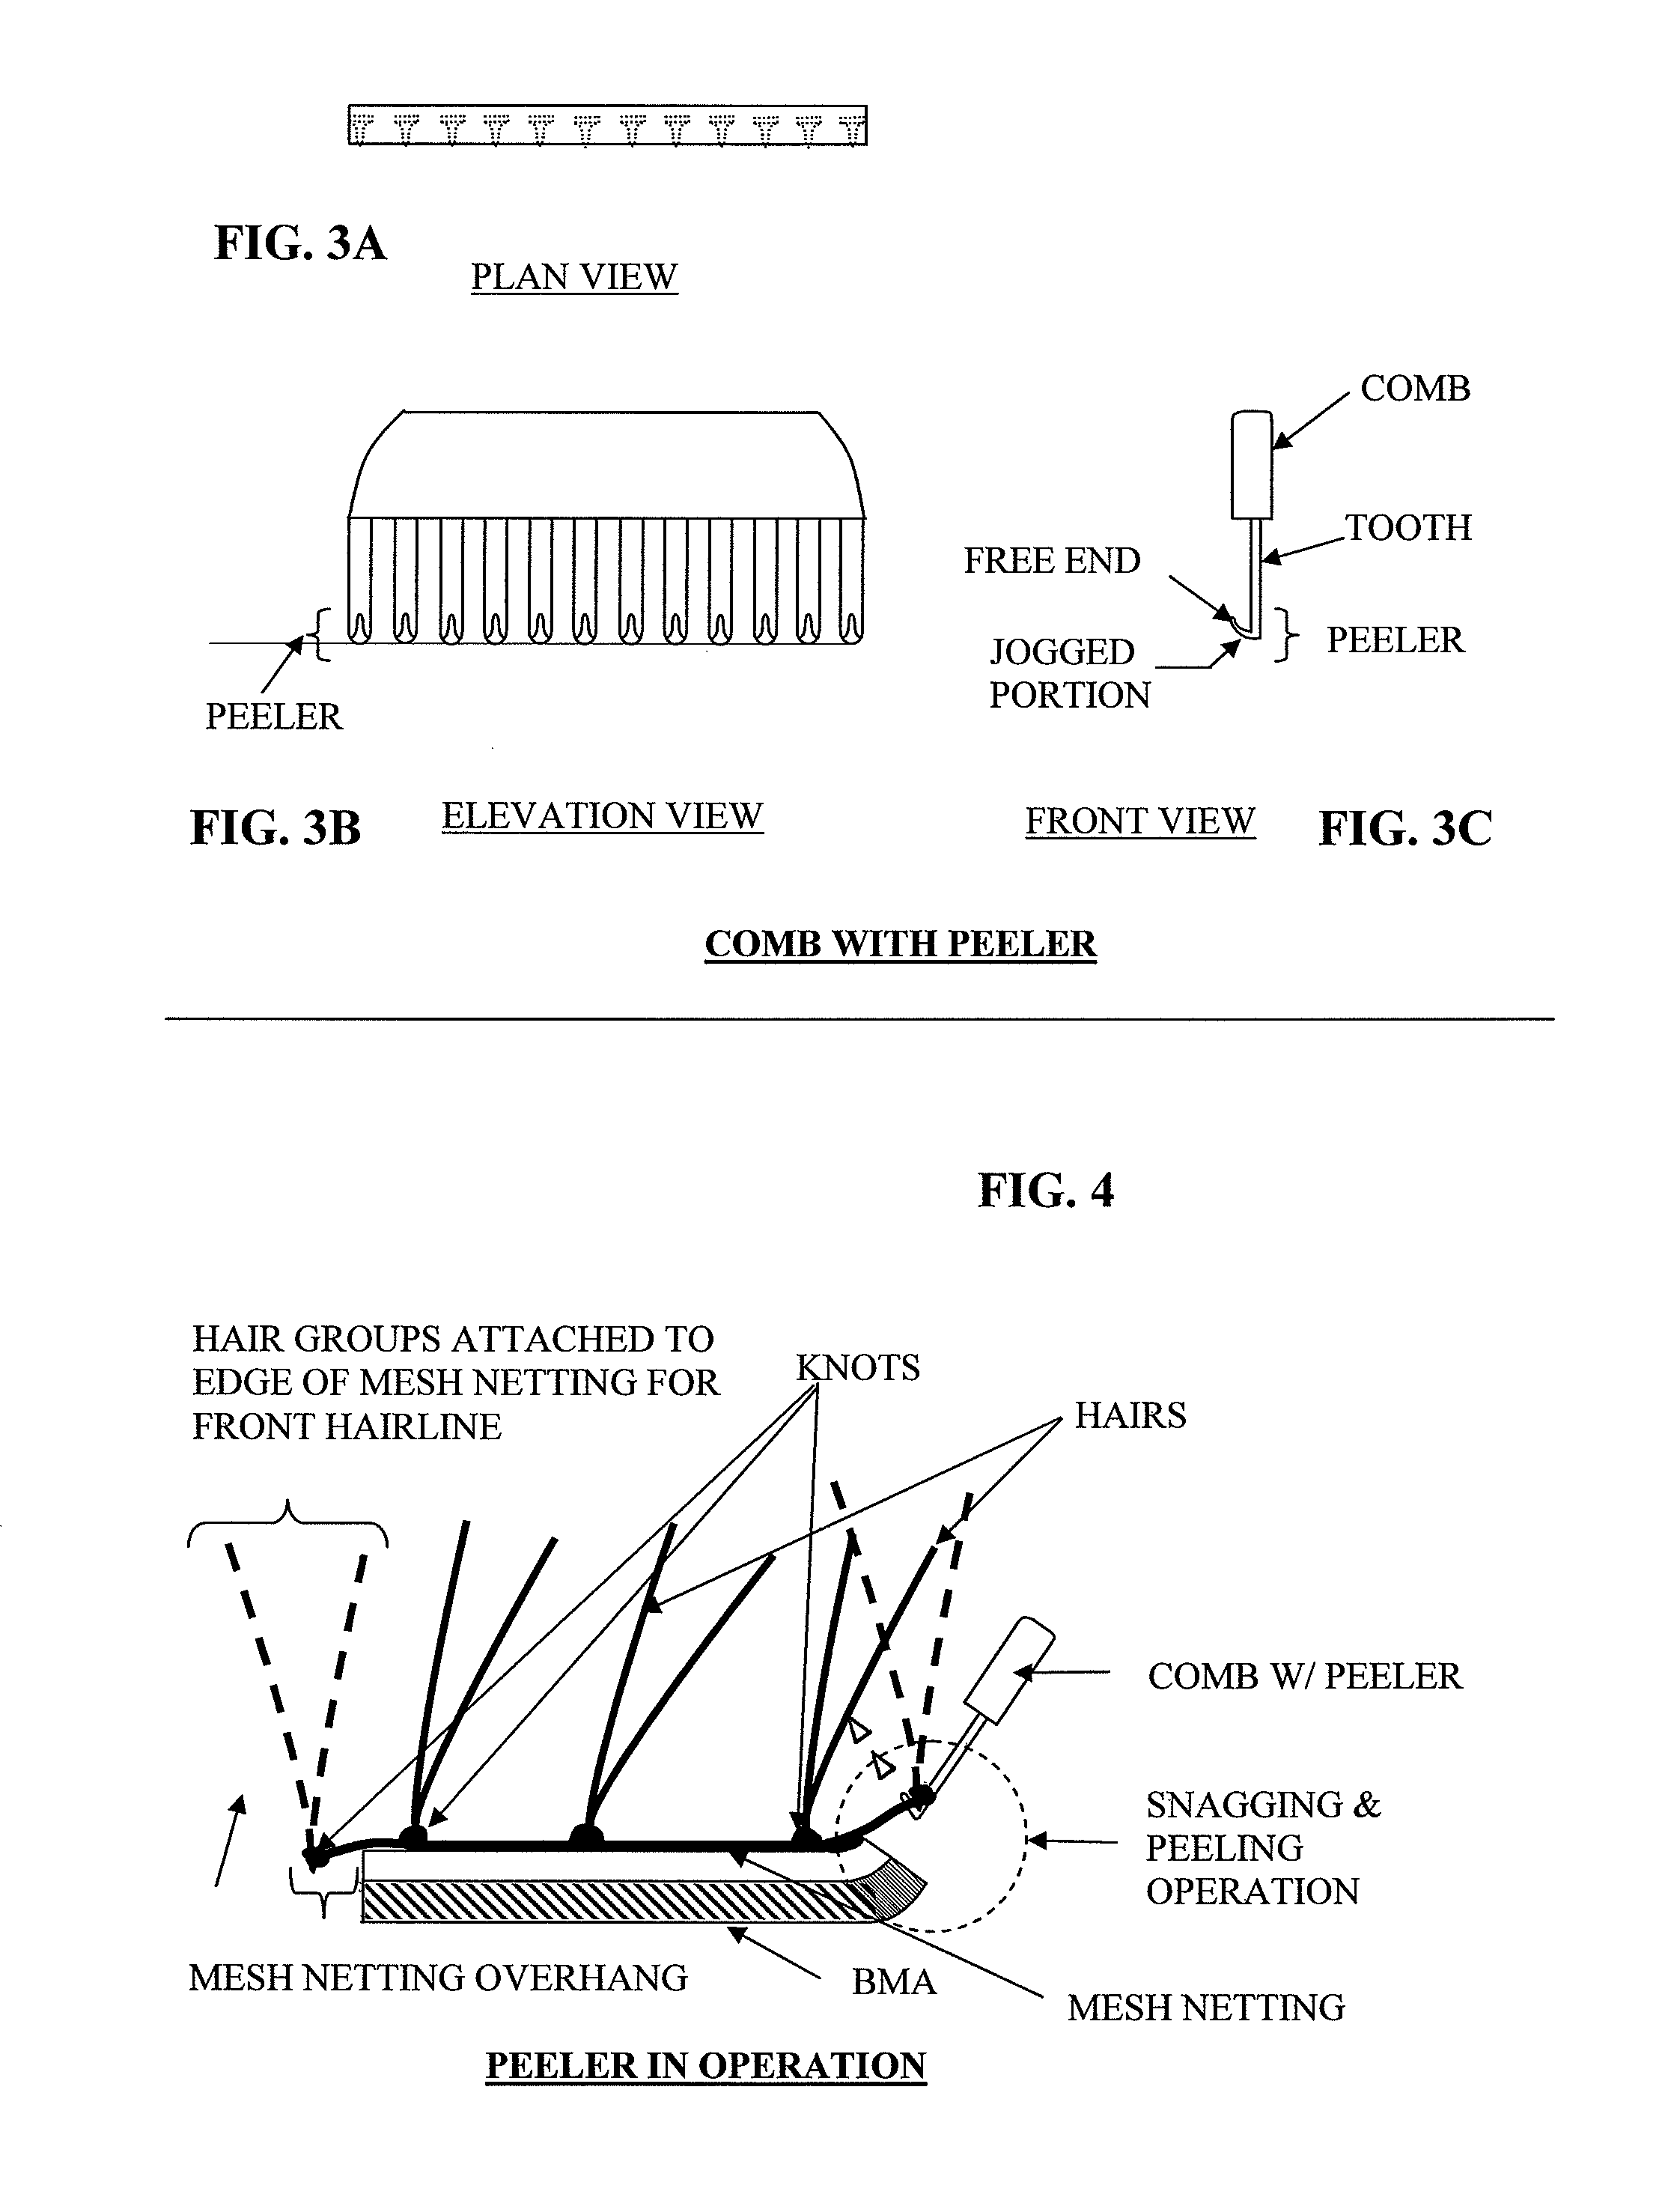 System and method for applying and removing cosmetic hair using biomimetic microstructure adhesive layer